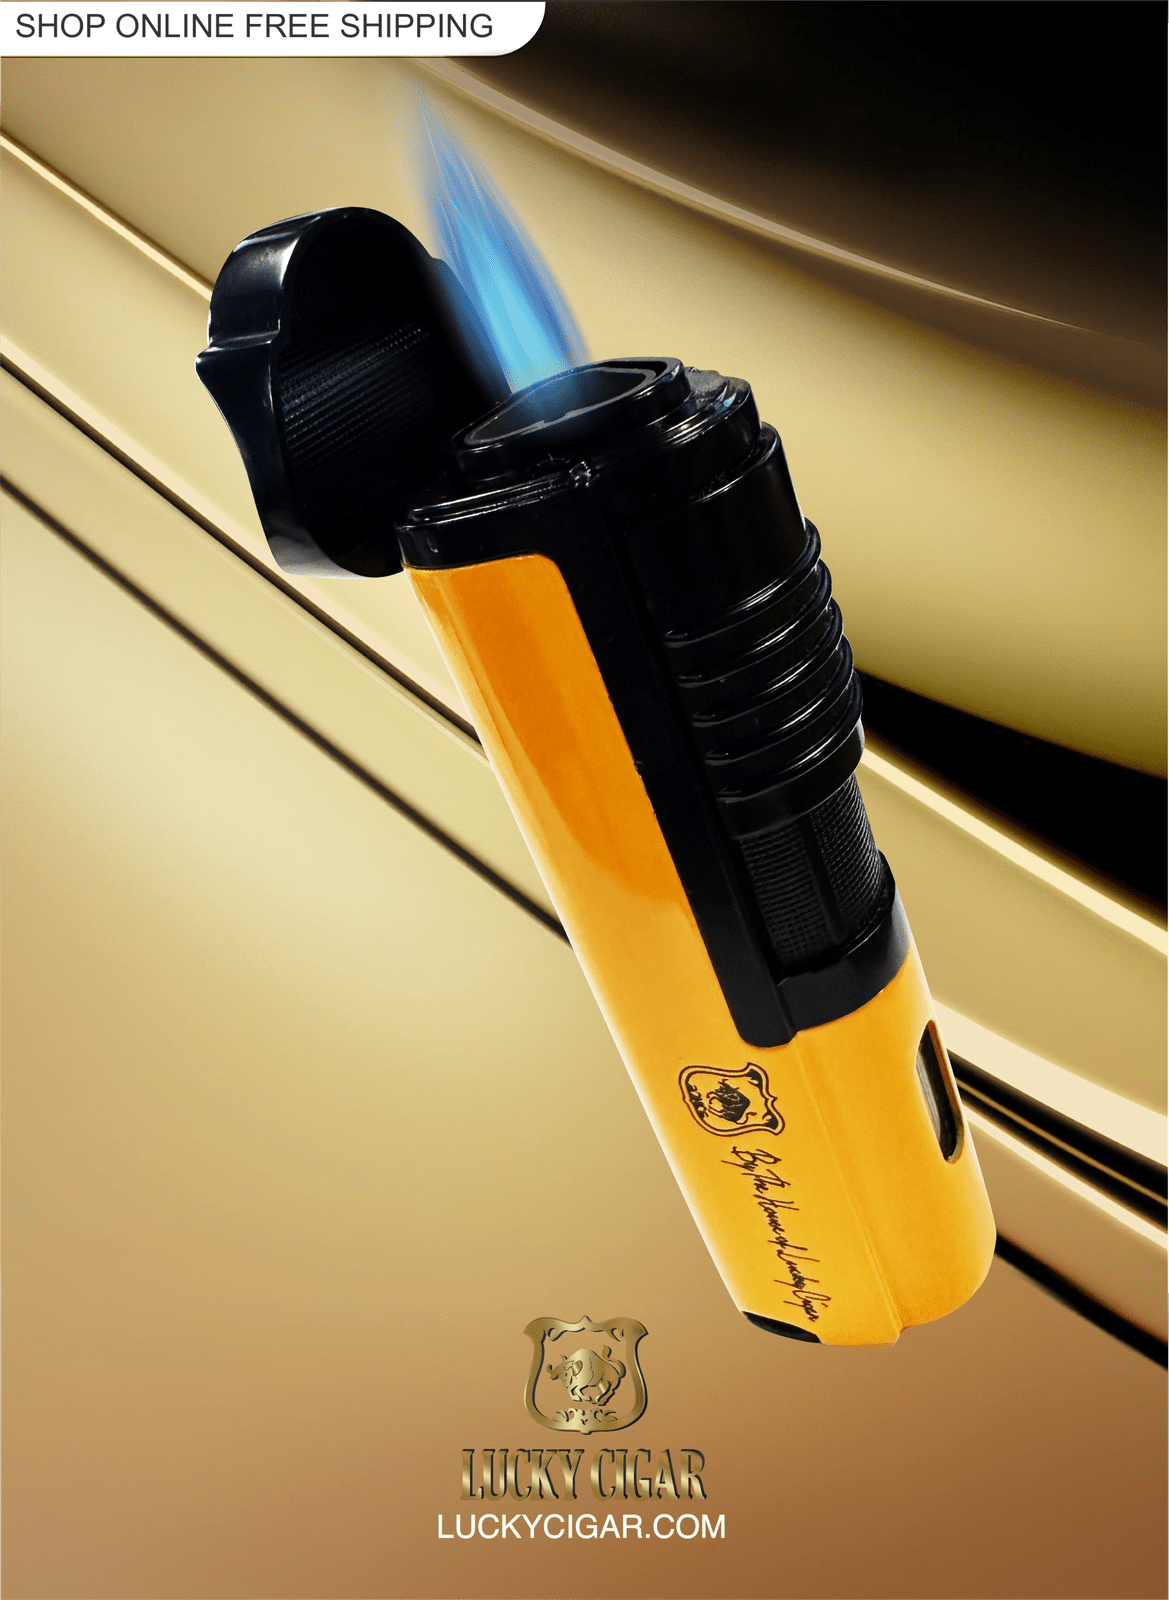 Cigar Lifestyle Accessories: Torch Lighter in Yellow/Black